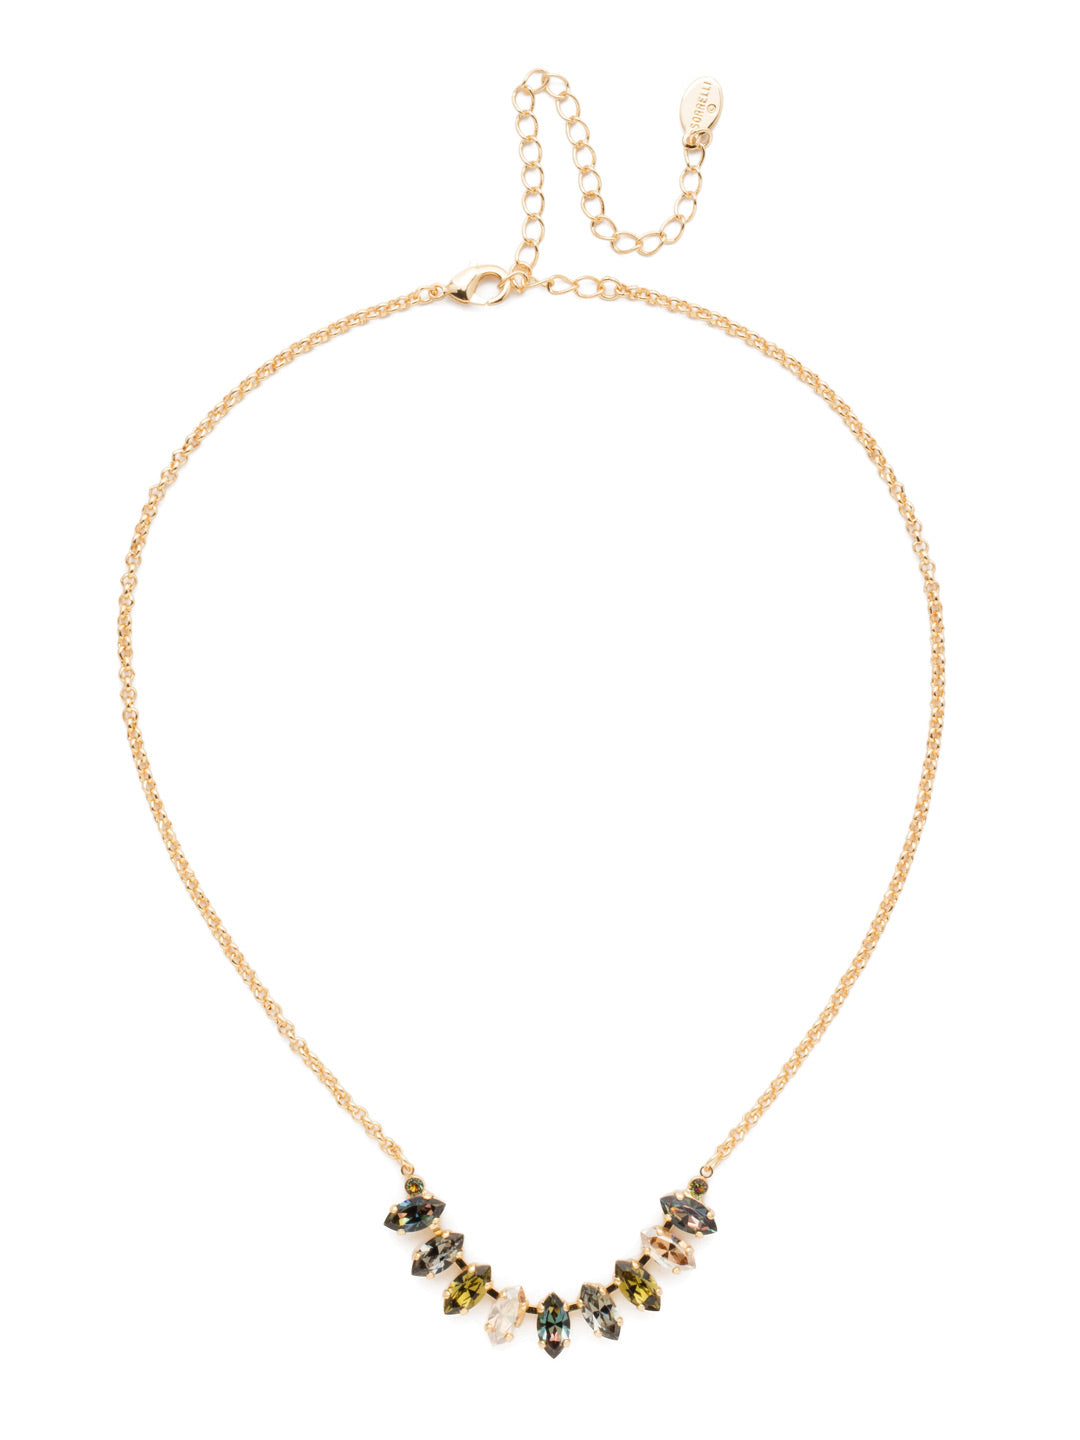 Clarissa Tennis Necklace - NEP4BGCSM - The Clarissa Tennis Necklace puts a row of sparkling navette crystals front and center. Put it on when you want to be there, too. From Sorrelli's Cashmere collection in our Bright Gold-tone finish.